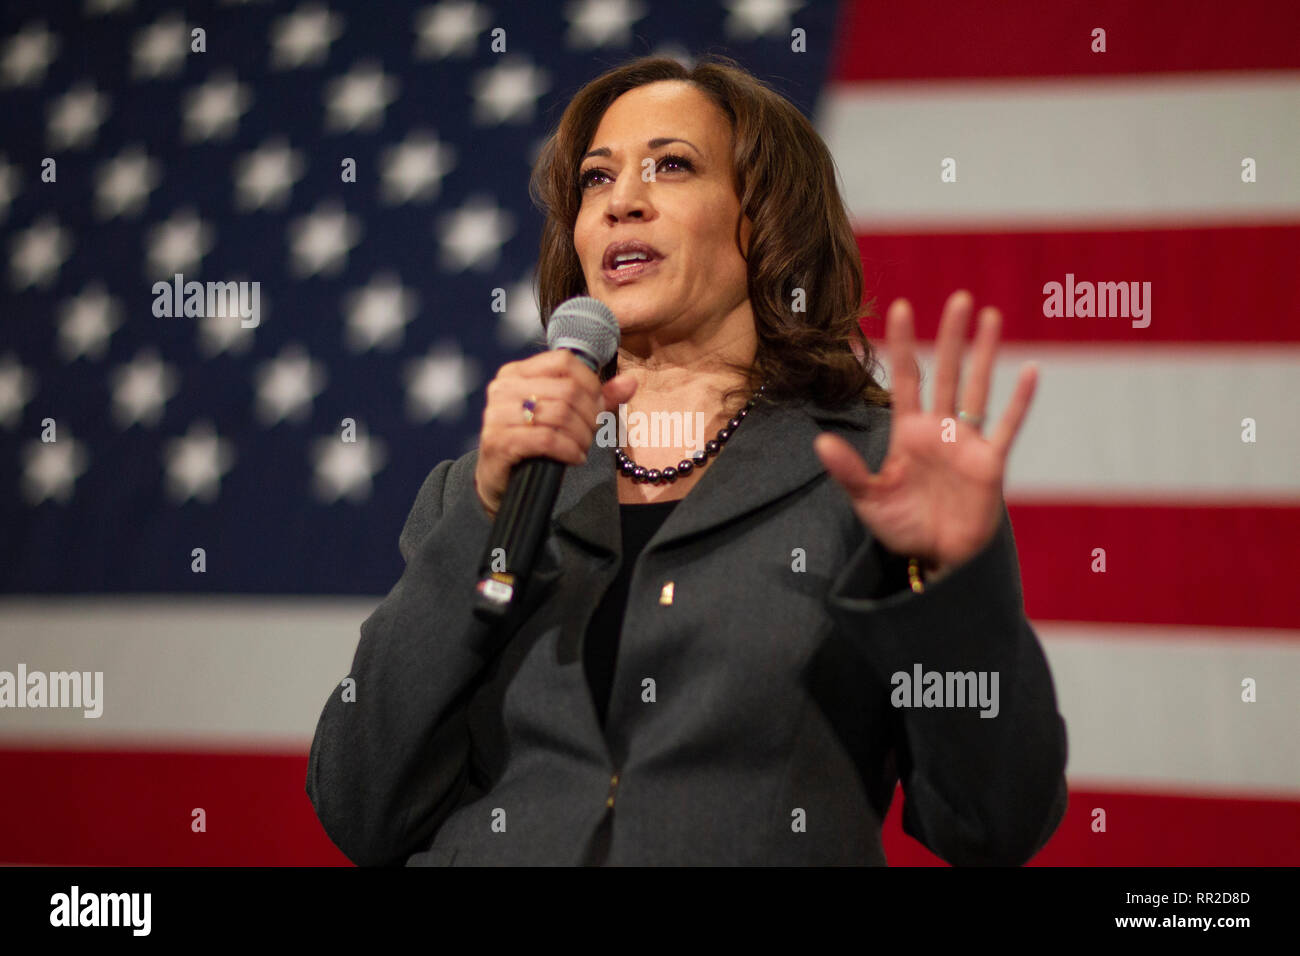 Ankeny, Iowa, USA. 23rd February, 2019. U.S. Senator Kamala Harris speaks during a town hall campaign event at the FFA Enrichment Center on the campus of the Des Moines Area Community College (DMACC) in Ankeny, Iowa, USA. Sen. Harris, a Democratic presidential candidate for the 2020 election, is campaigning in Iowa ahead of the state's first-in-the-nation caucuses. J. Alex Cooney/Alamy Live News Stock Photo